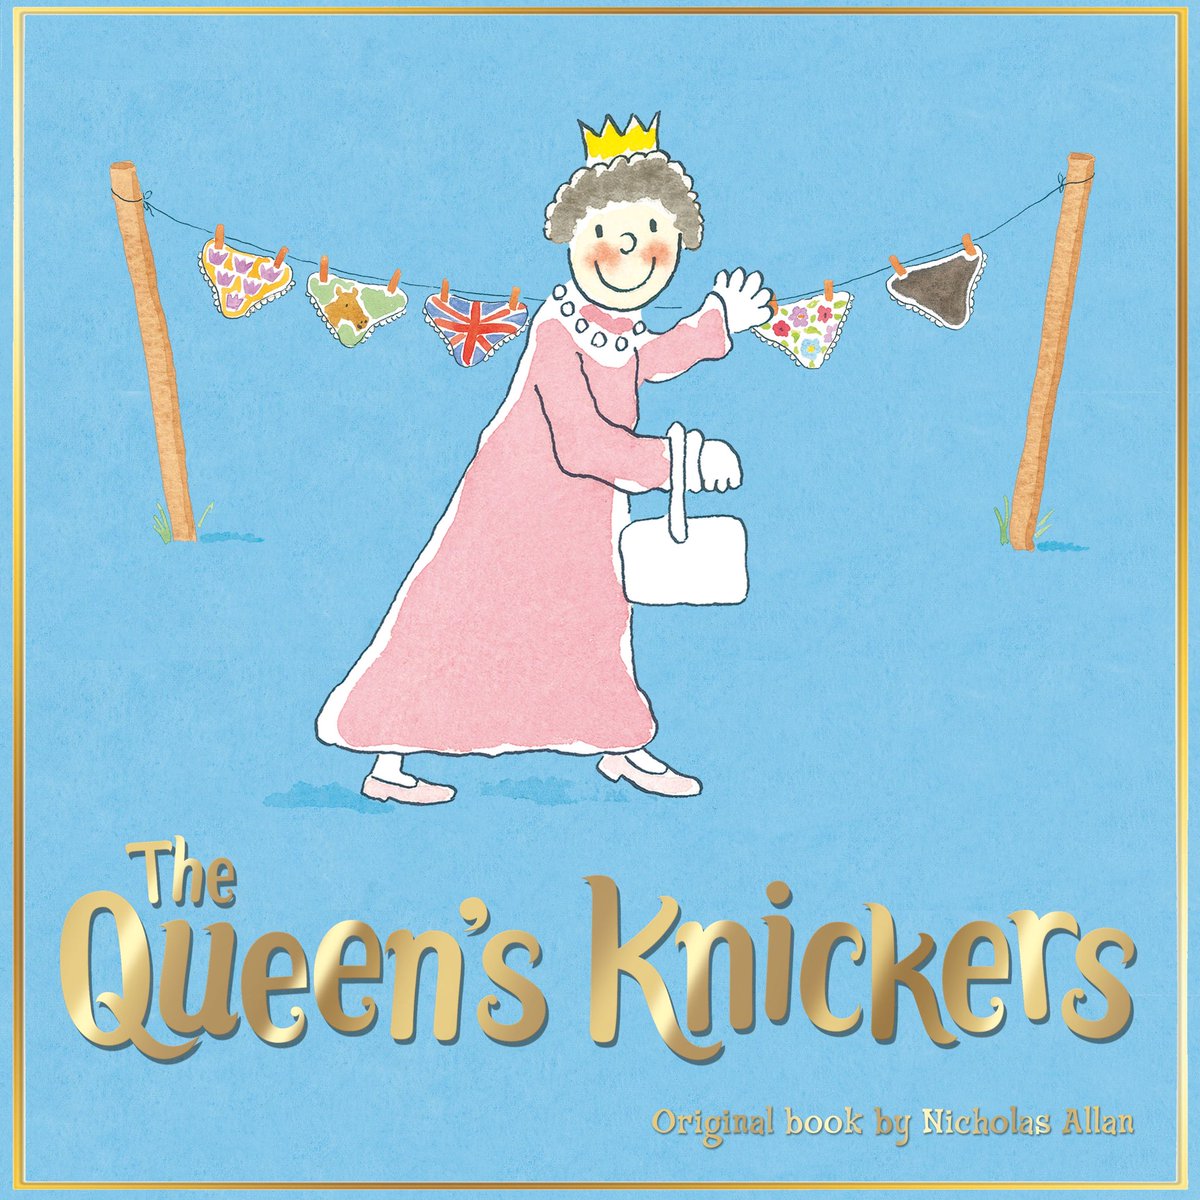 ON SALE NOW: The Queen’s Knickers. Performances between 8-19th August at 2pm. Book now on artstheatrewestend.co.uk/events/the-que… @TalegateTheatre